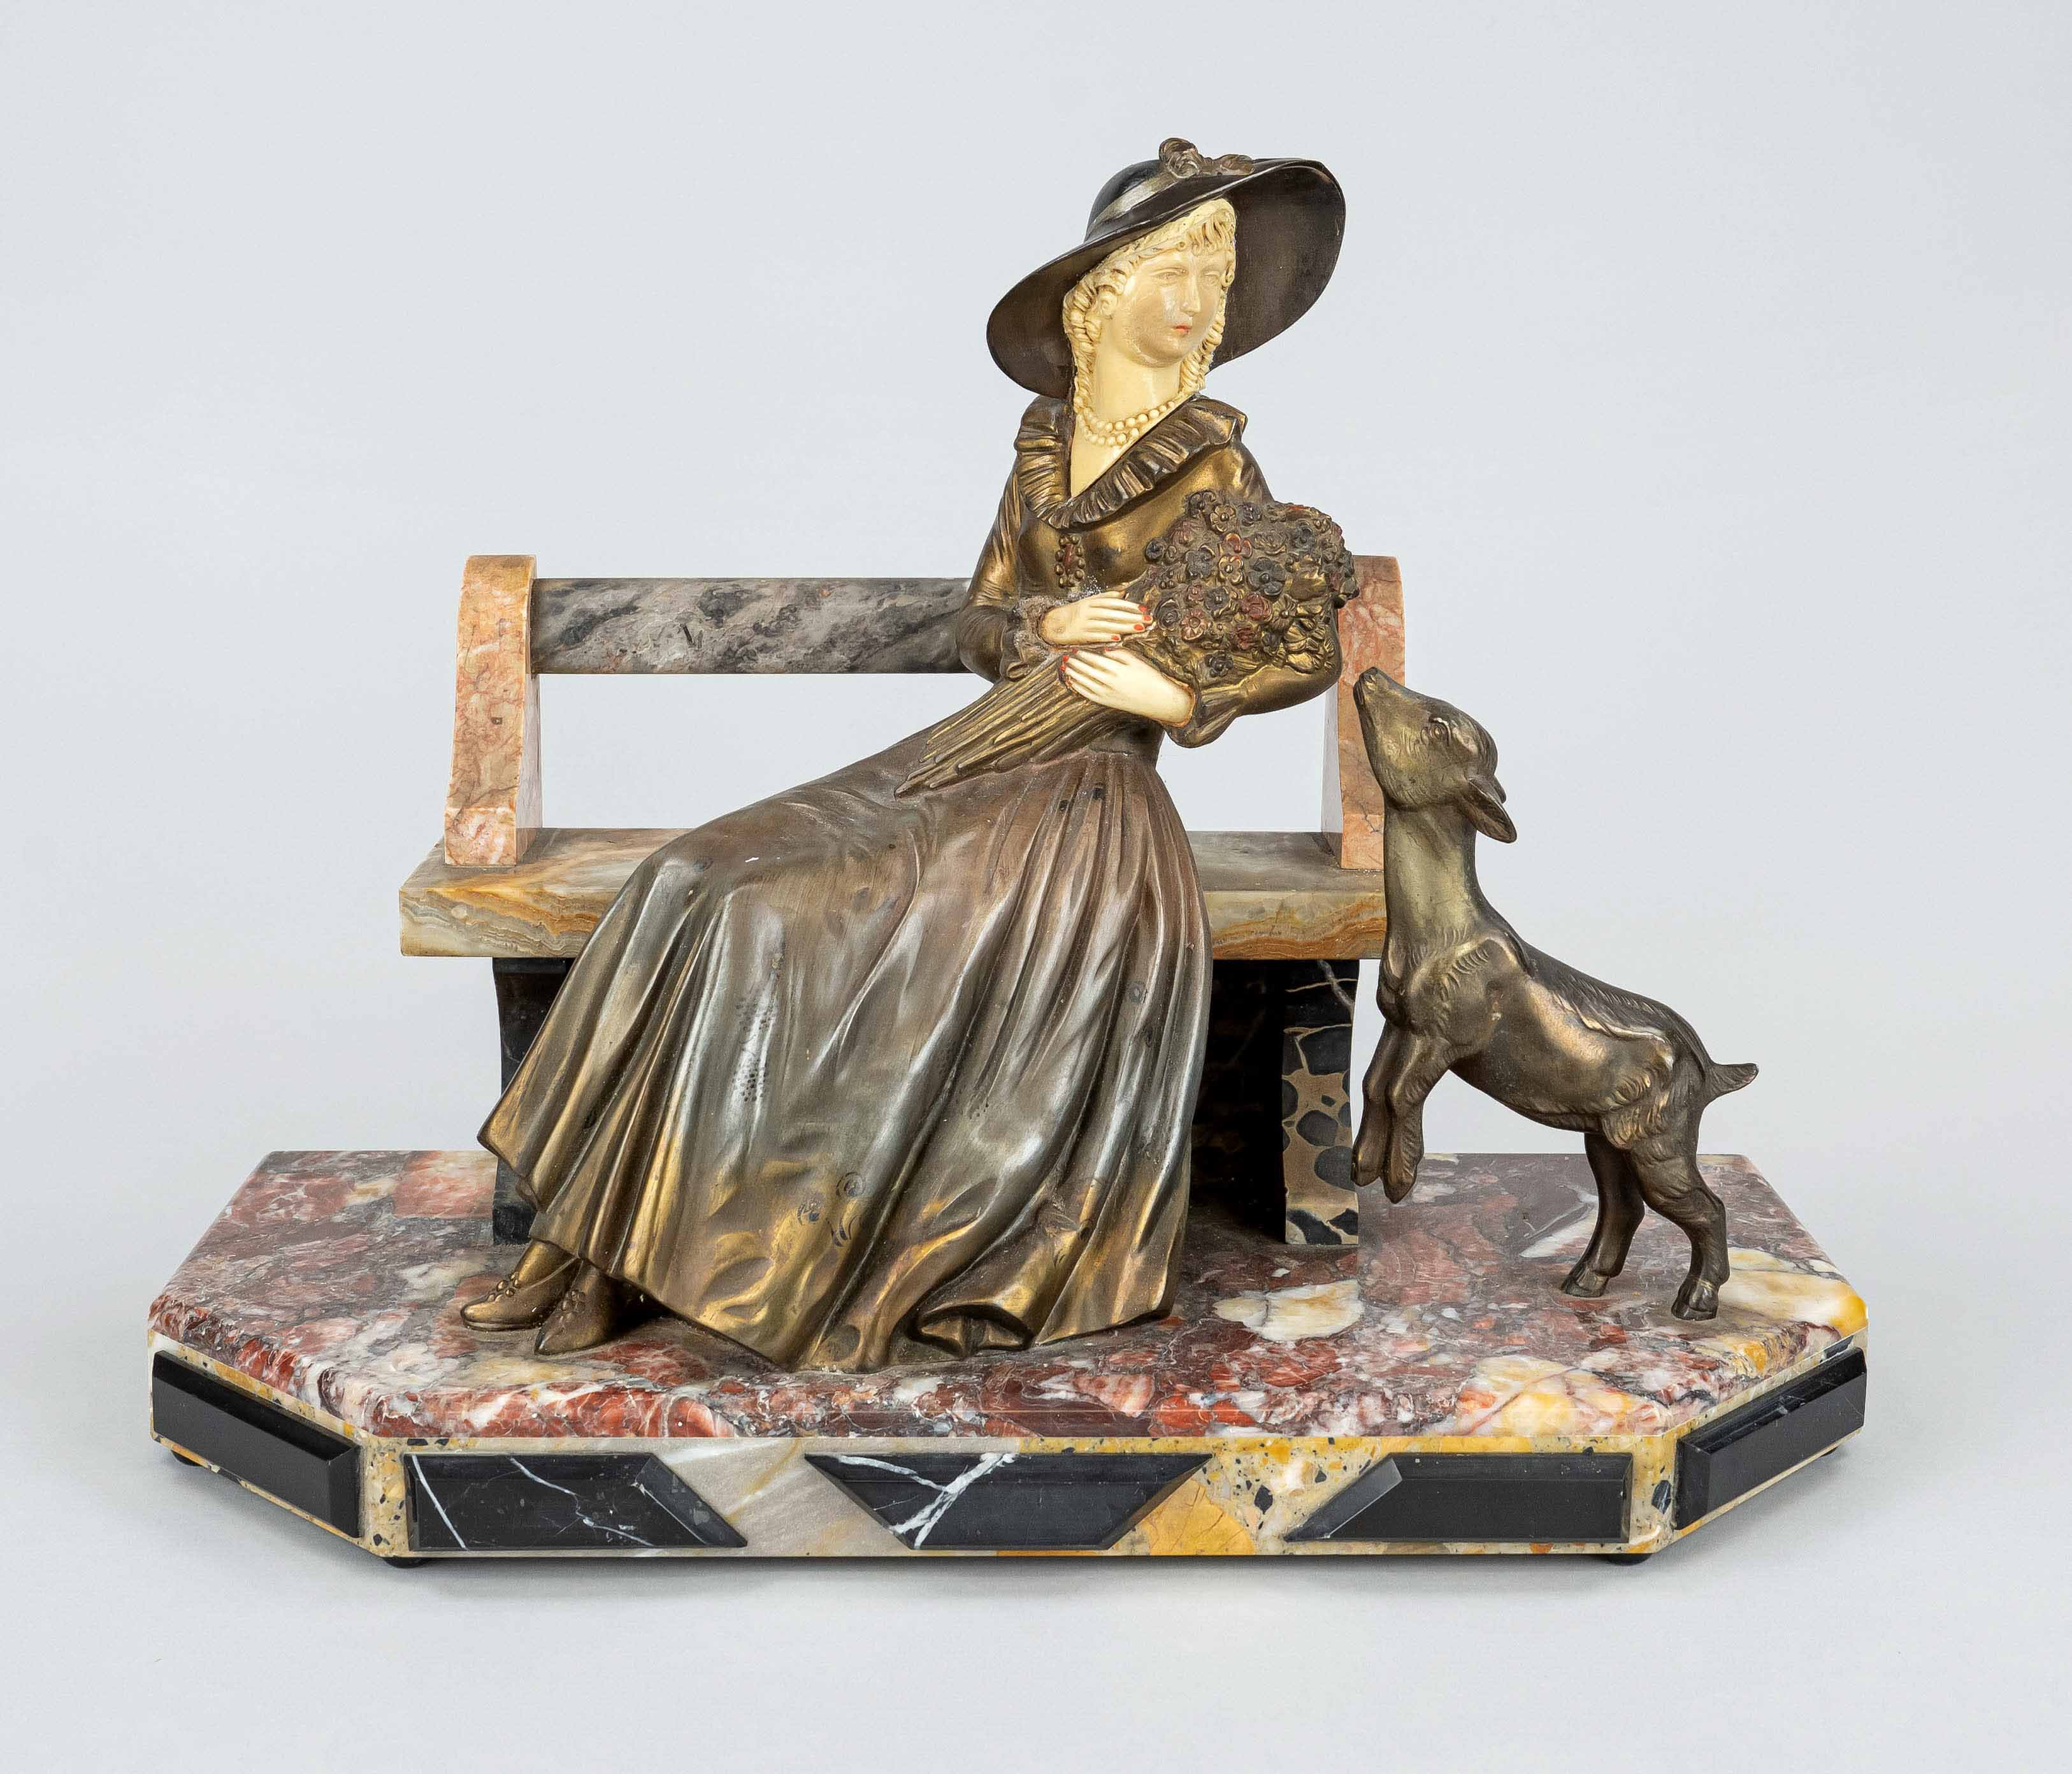 R. Lullier, sculptor c. 1920, lady with bouquet and calf, large Art Deco group, bronzed metal